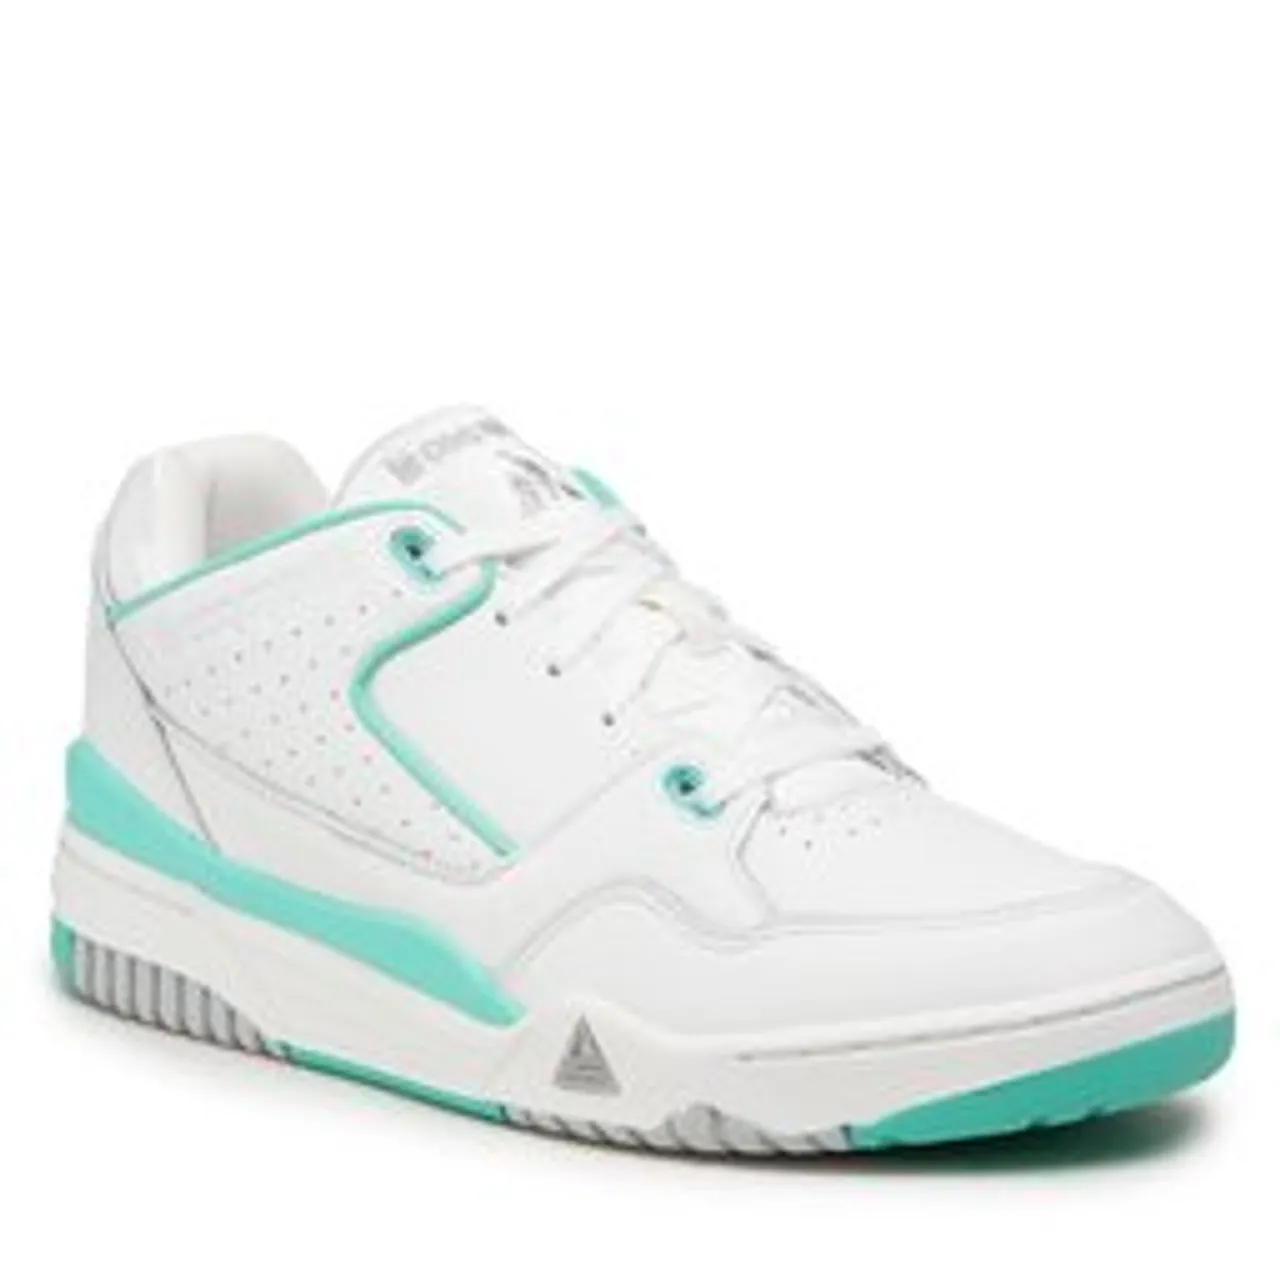 Sneakers Le Coq Sportif Lcs T1000 Nineties 2220277 Optical White/Cockatoo